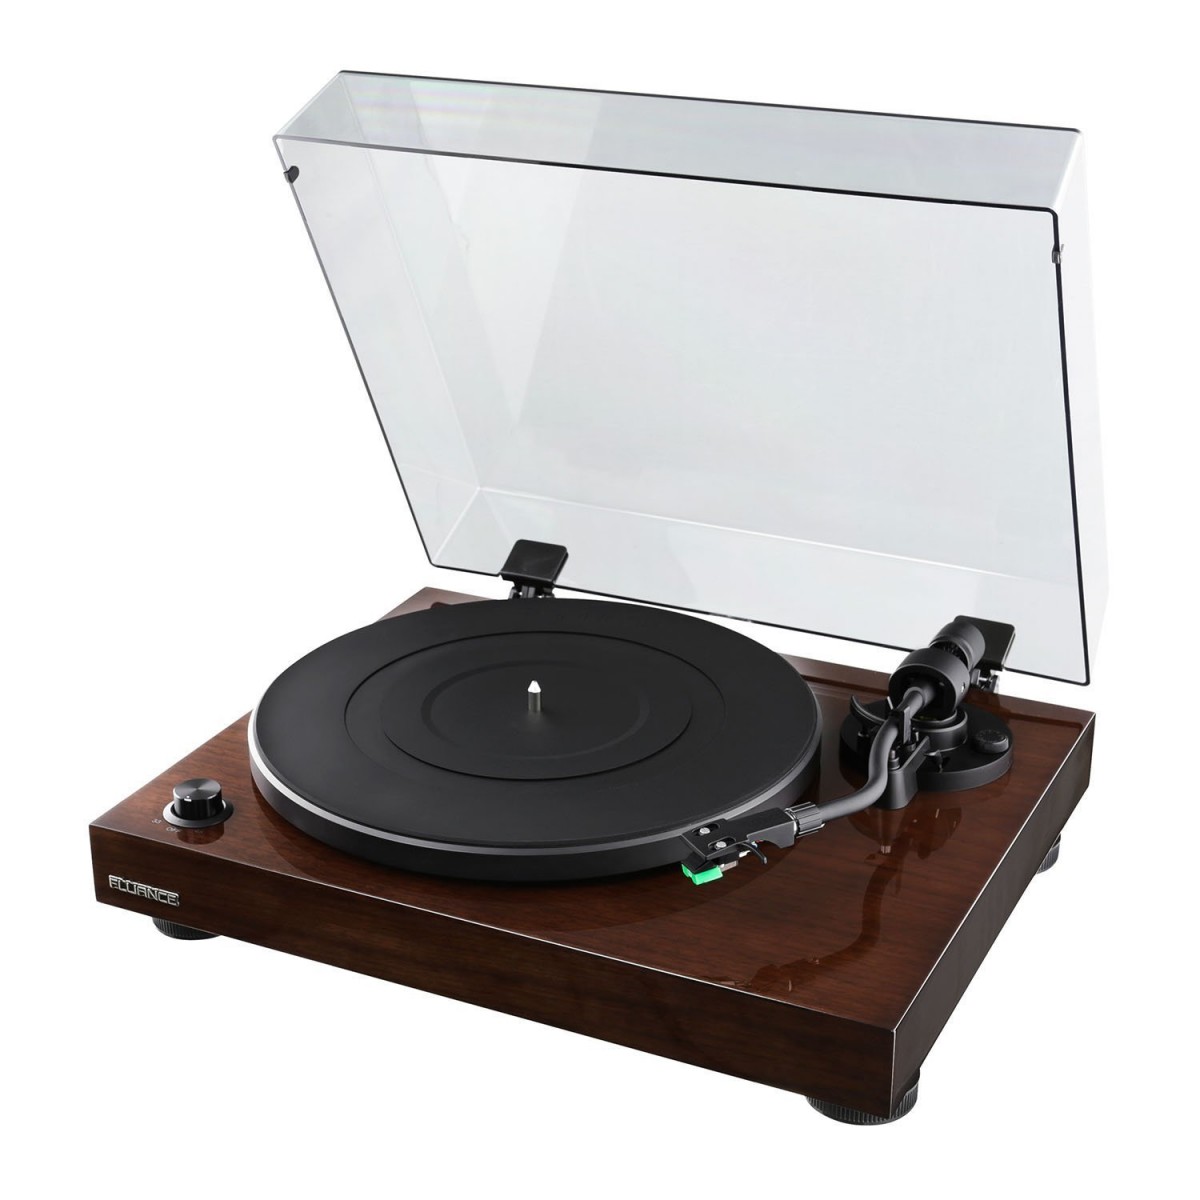 fluance rt81 turntable review